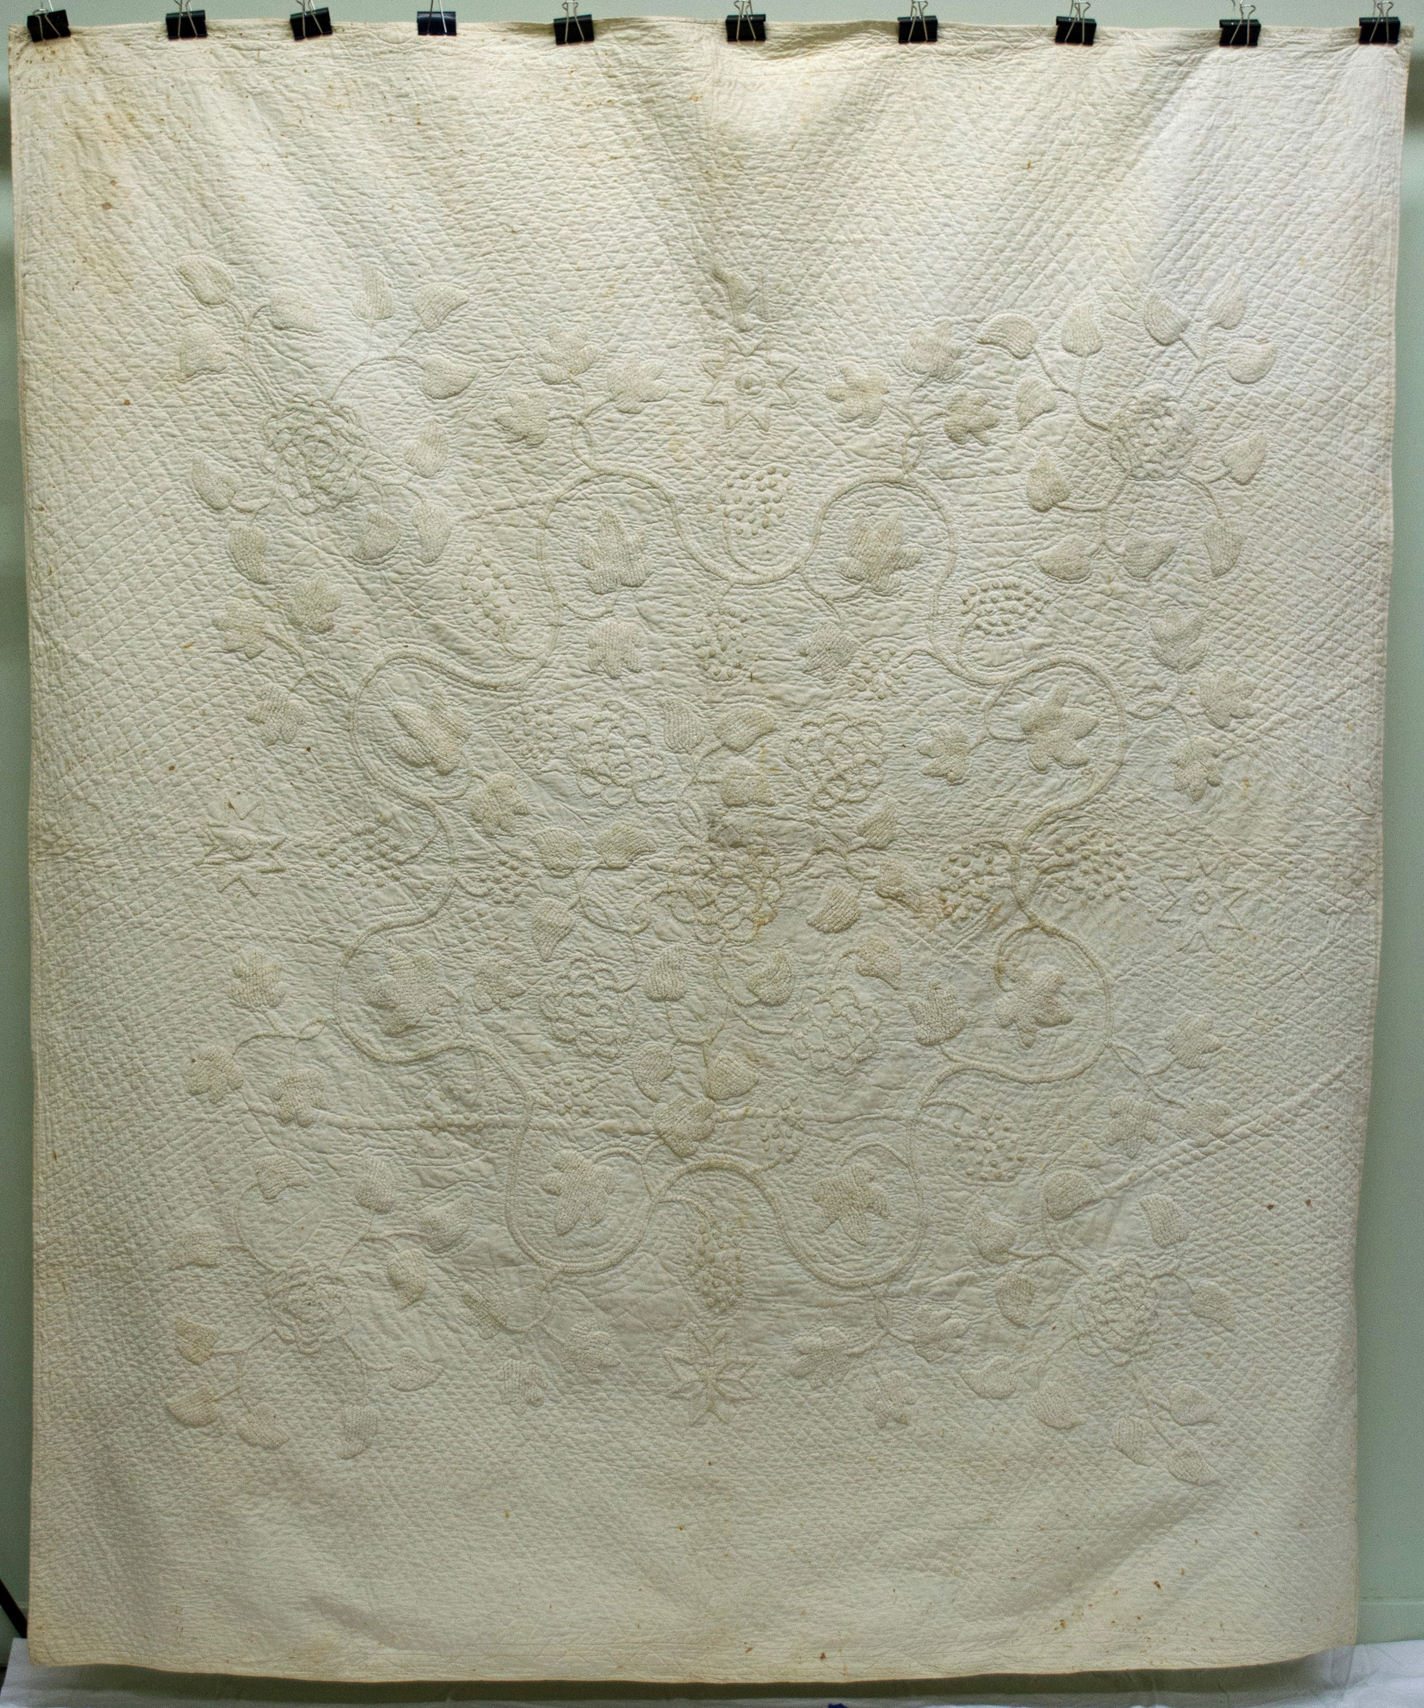 an elaborate floral design in a white-on-white quilted bedcover